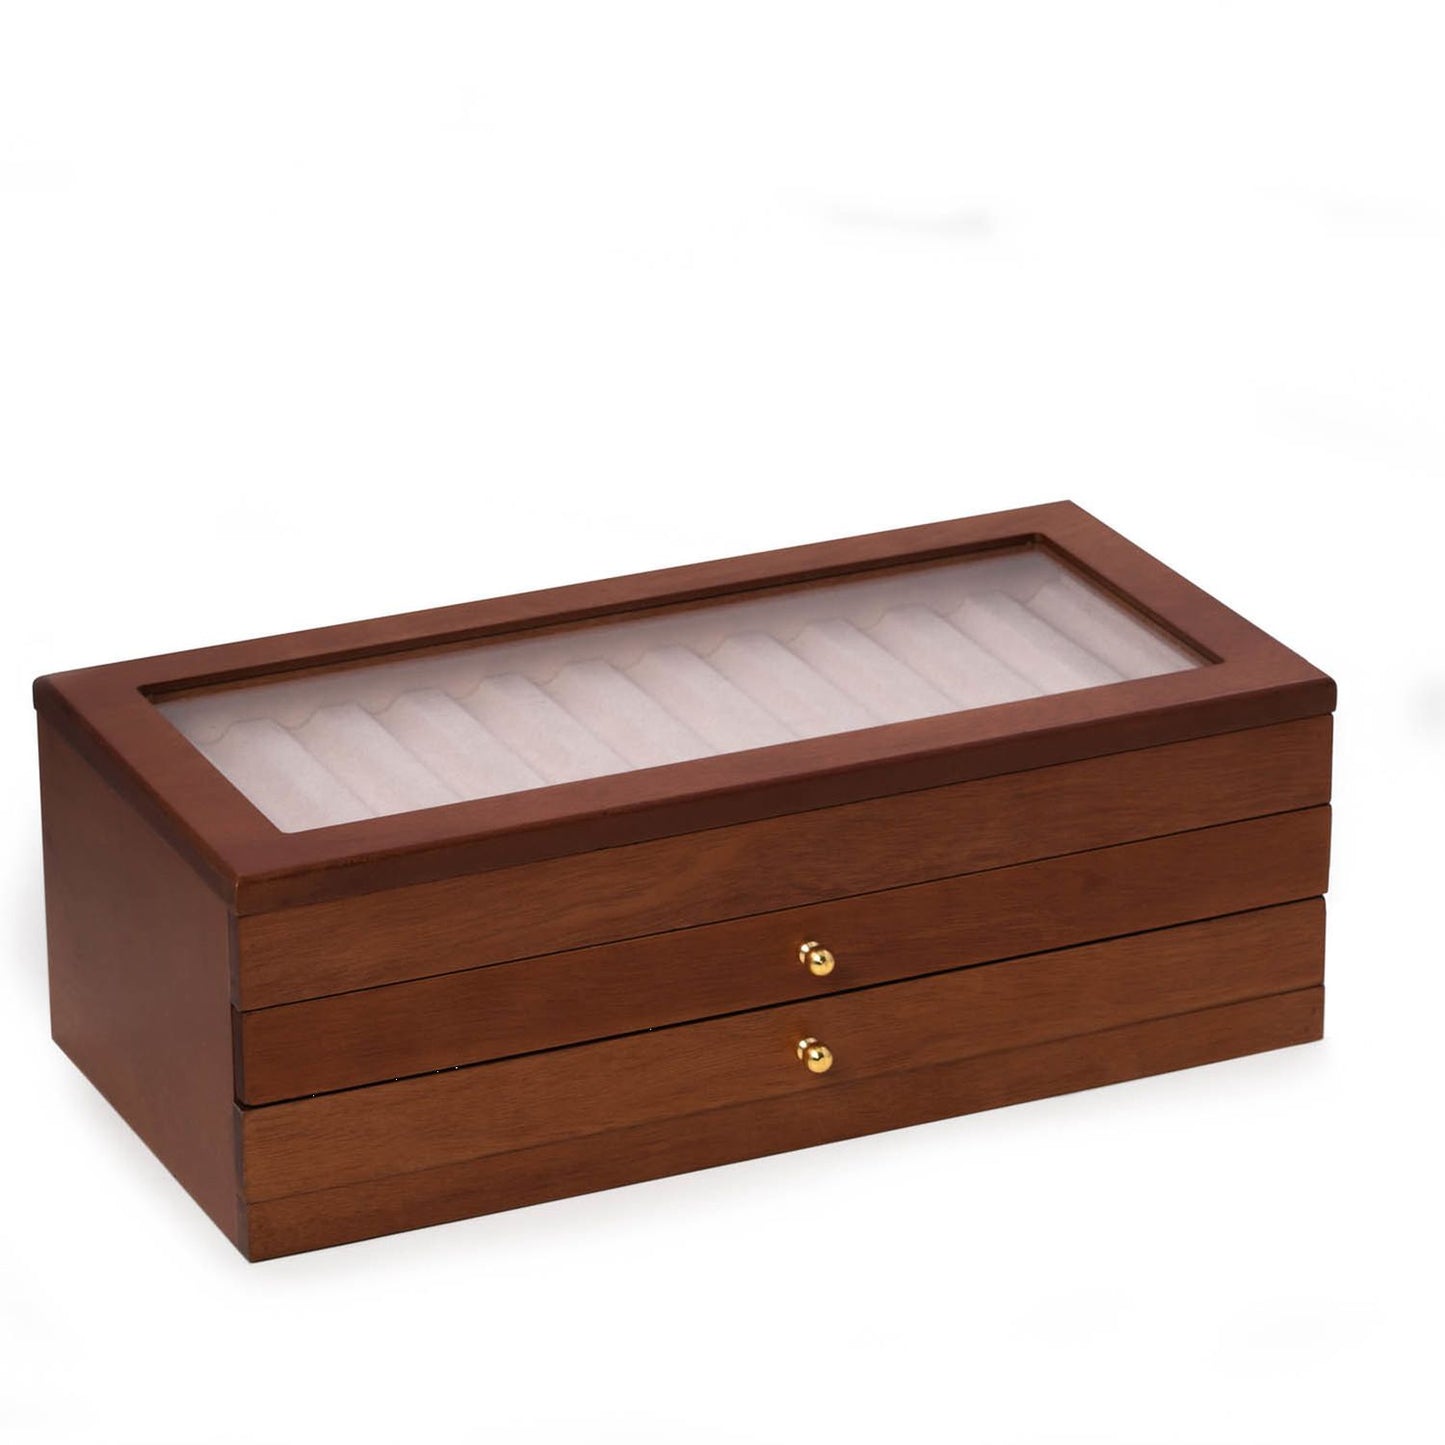 Three Level Cherry Wood 36 Pen Storage Case With Glass Top